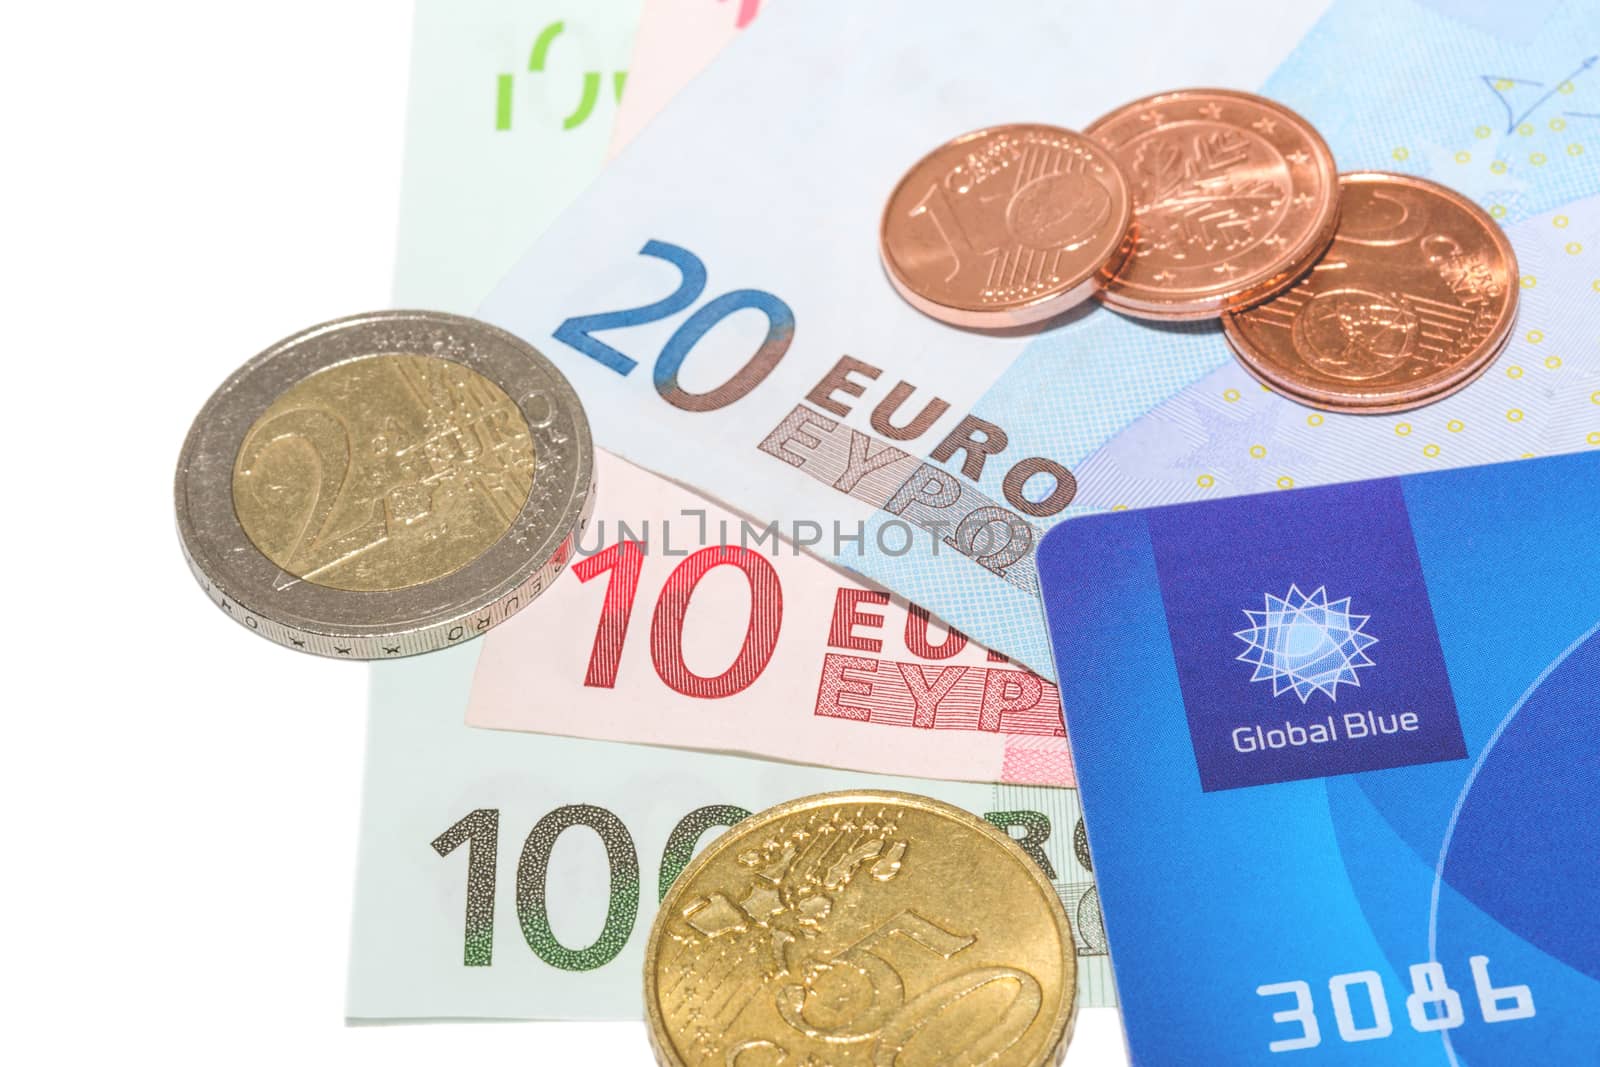 MUNICH, GERMANY - FEBRUARY 23, 2014: Global Blue company Tax Free card with European money. Isolate on white.